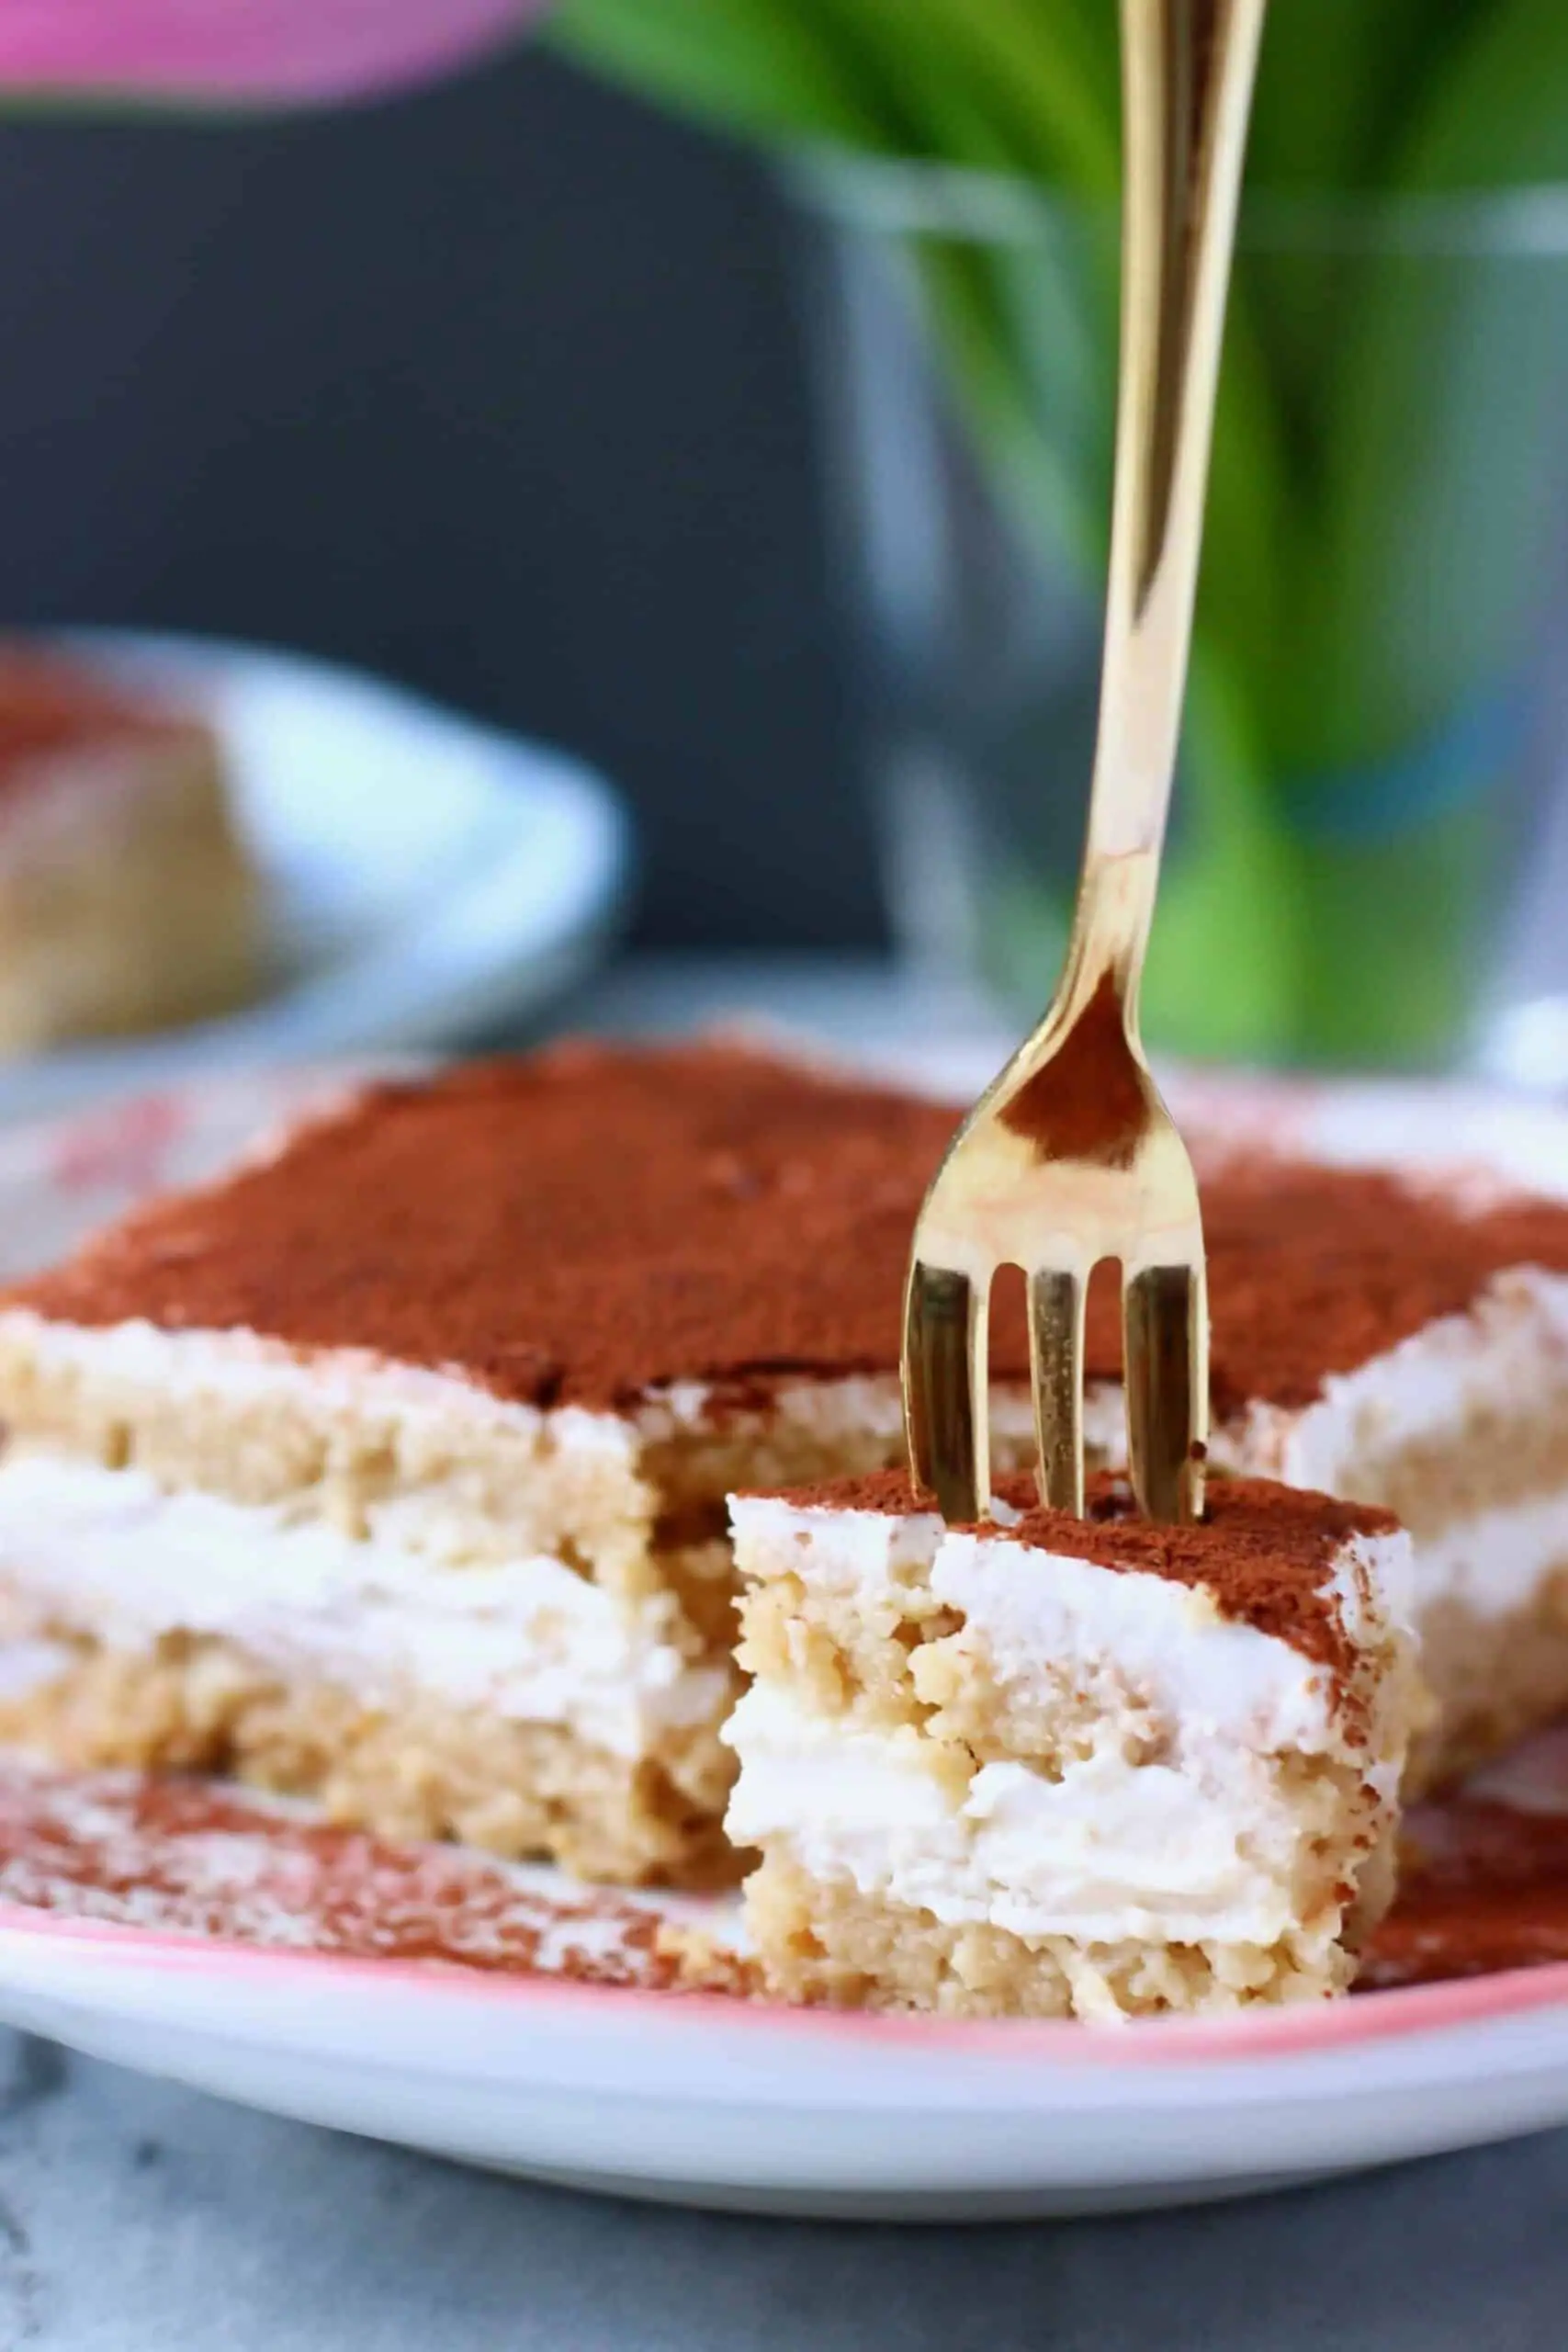 Photo of a slice of tiramisu with a bite taken out of it on a white plate with pink flowers and a gold fork taking a mouthful